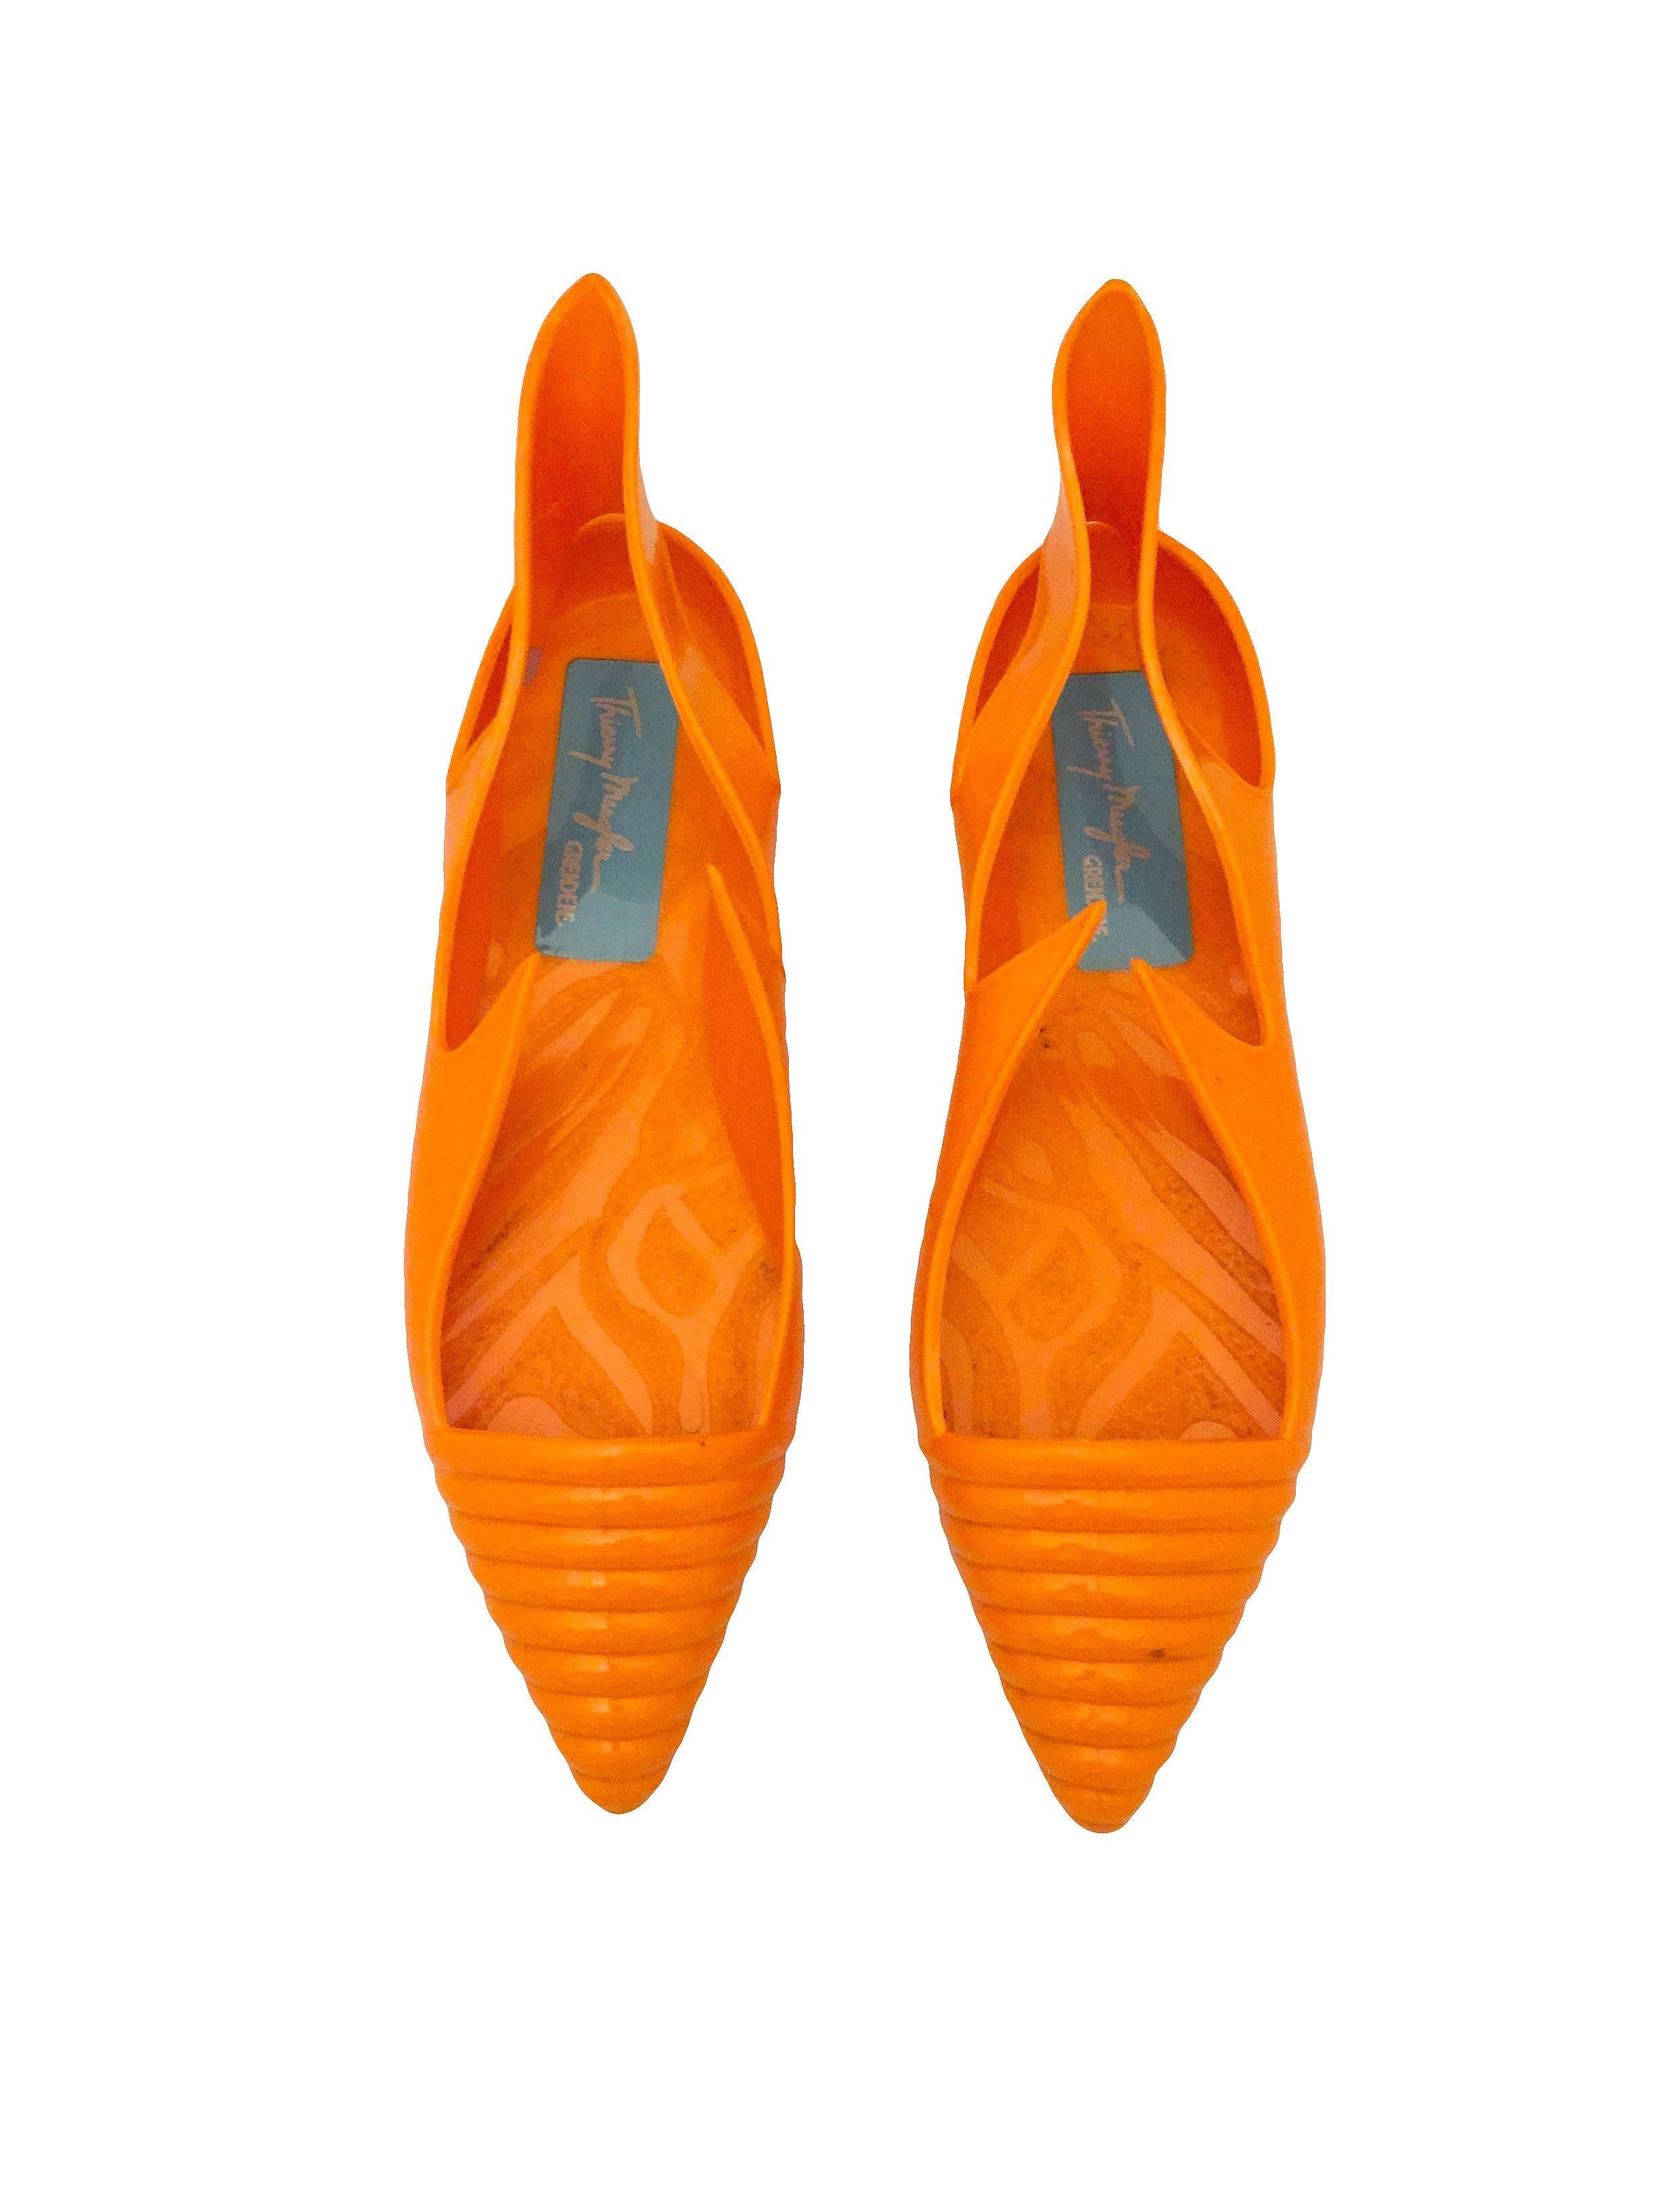 Rare Thierry Mugler Limited Edition Jelly Shoes, 1985 In Good Condition For Sale In Bethesda, MD